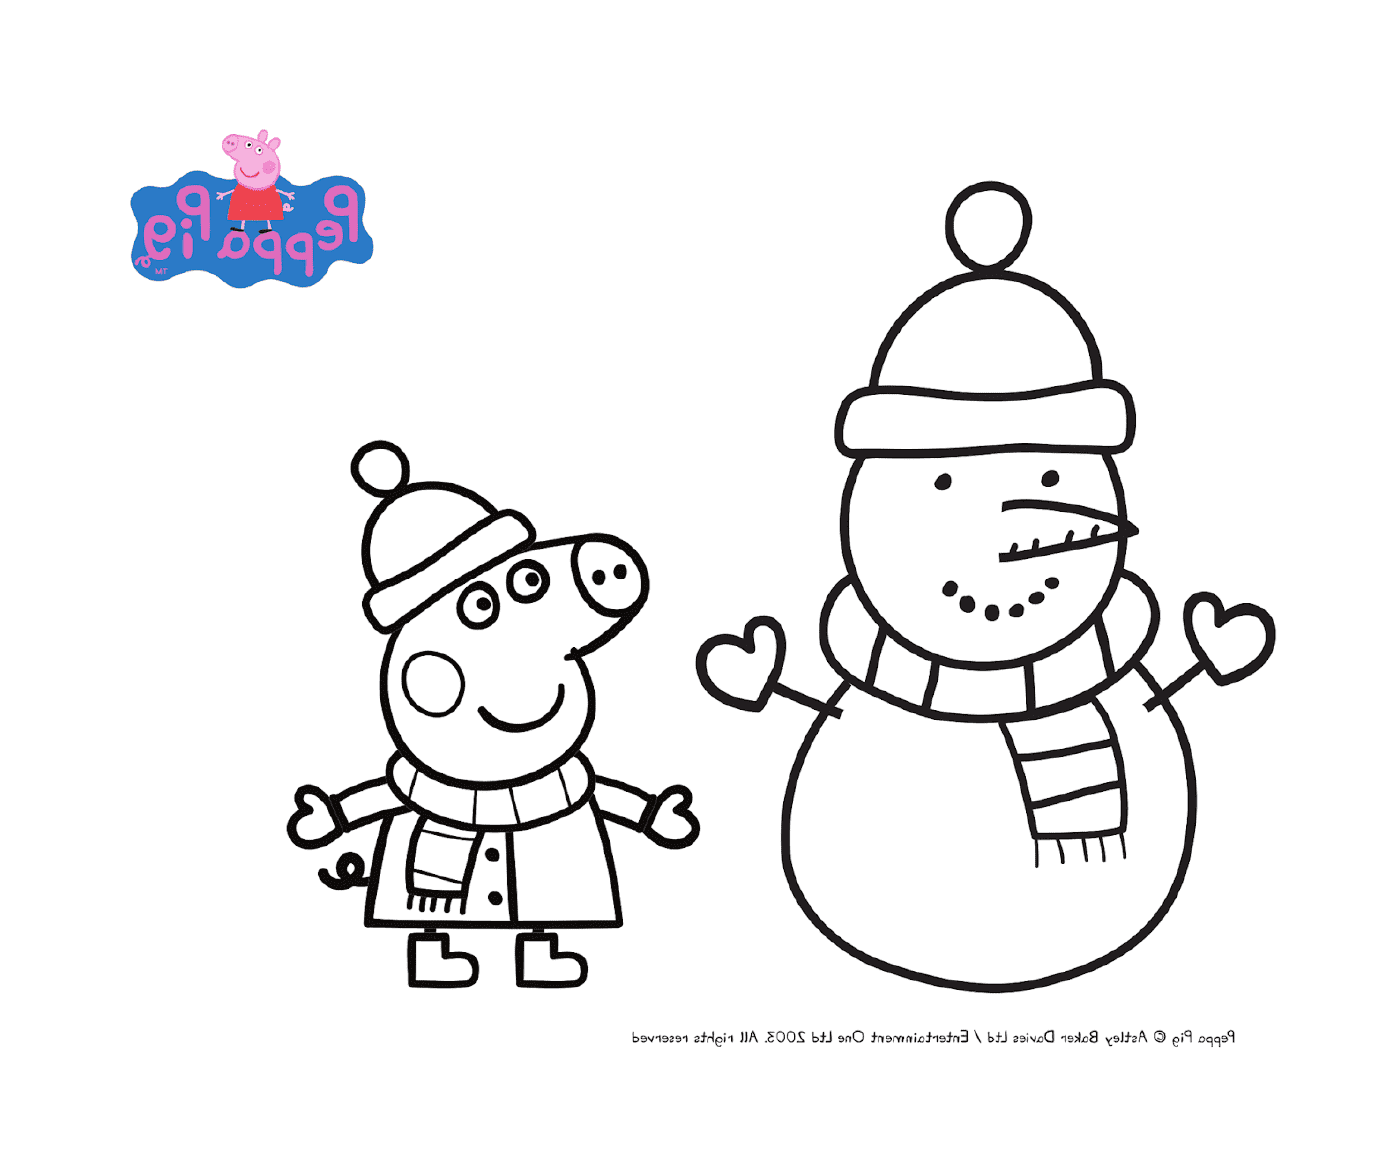  Peppa Pig in winter costume for Christmas 